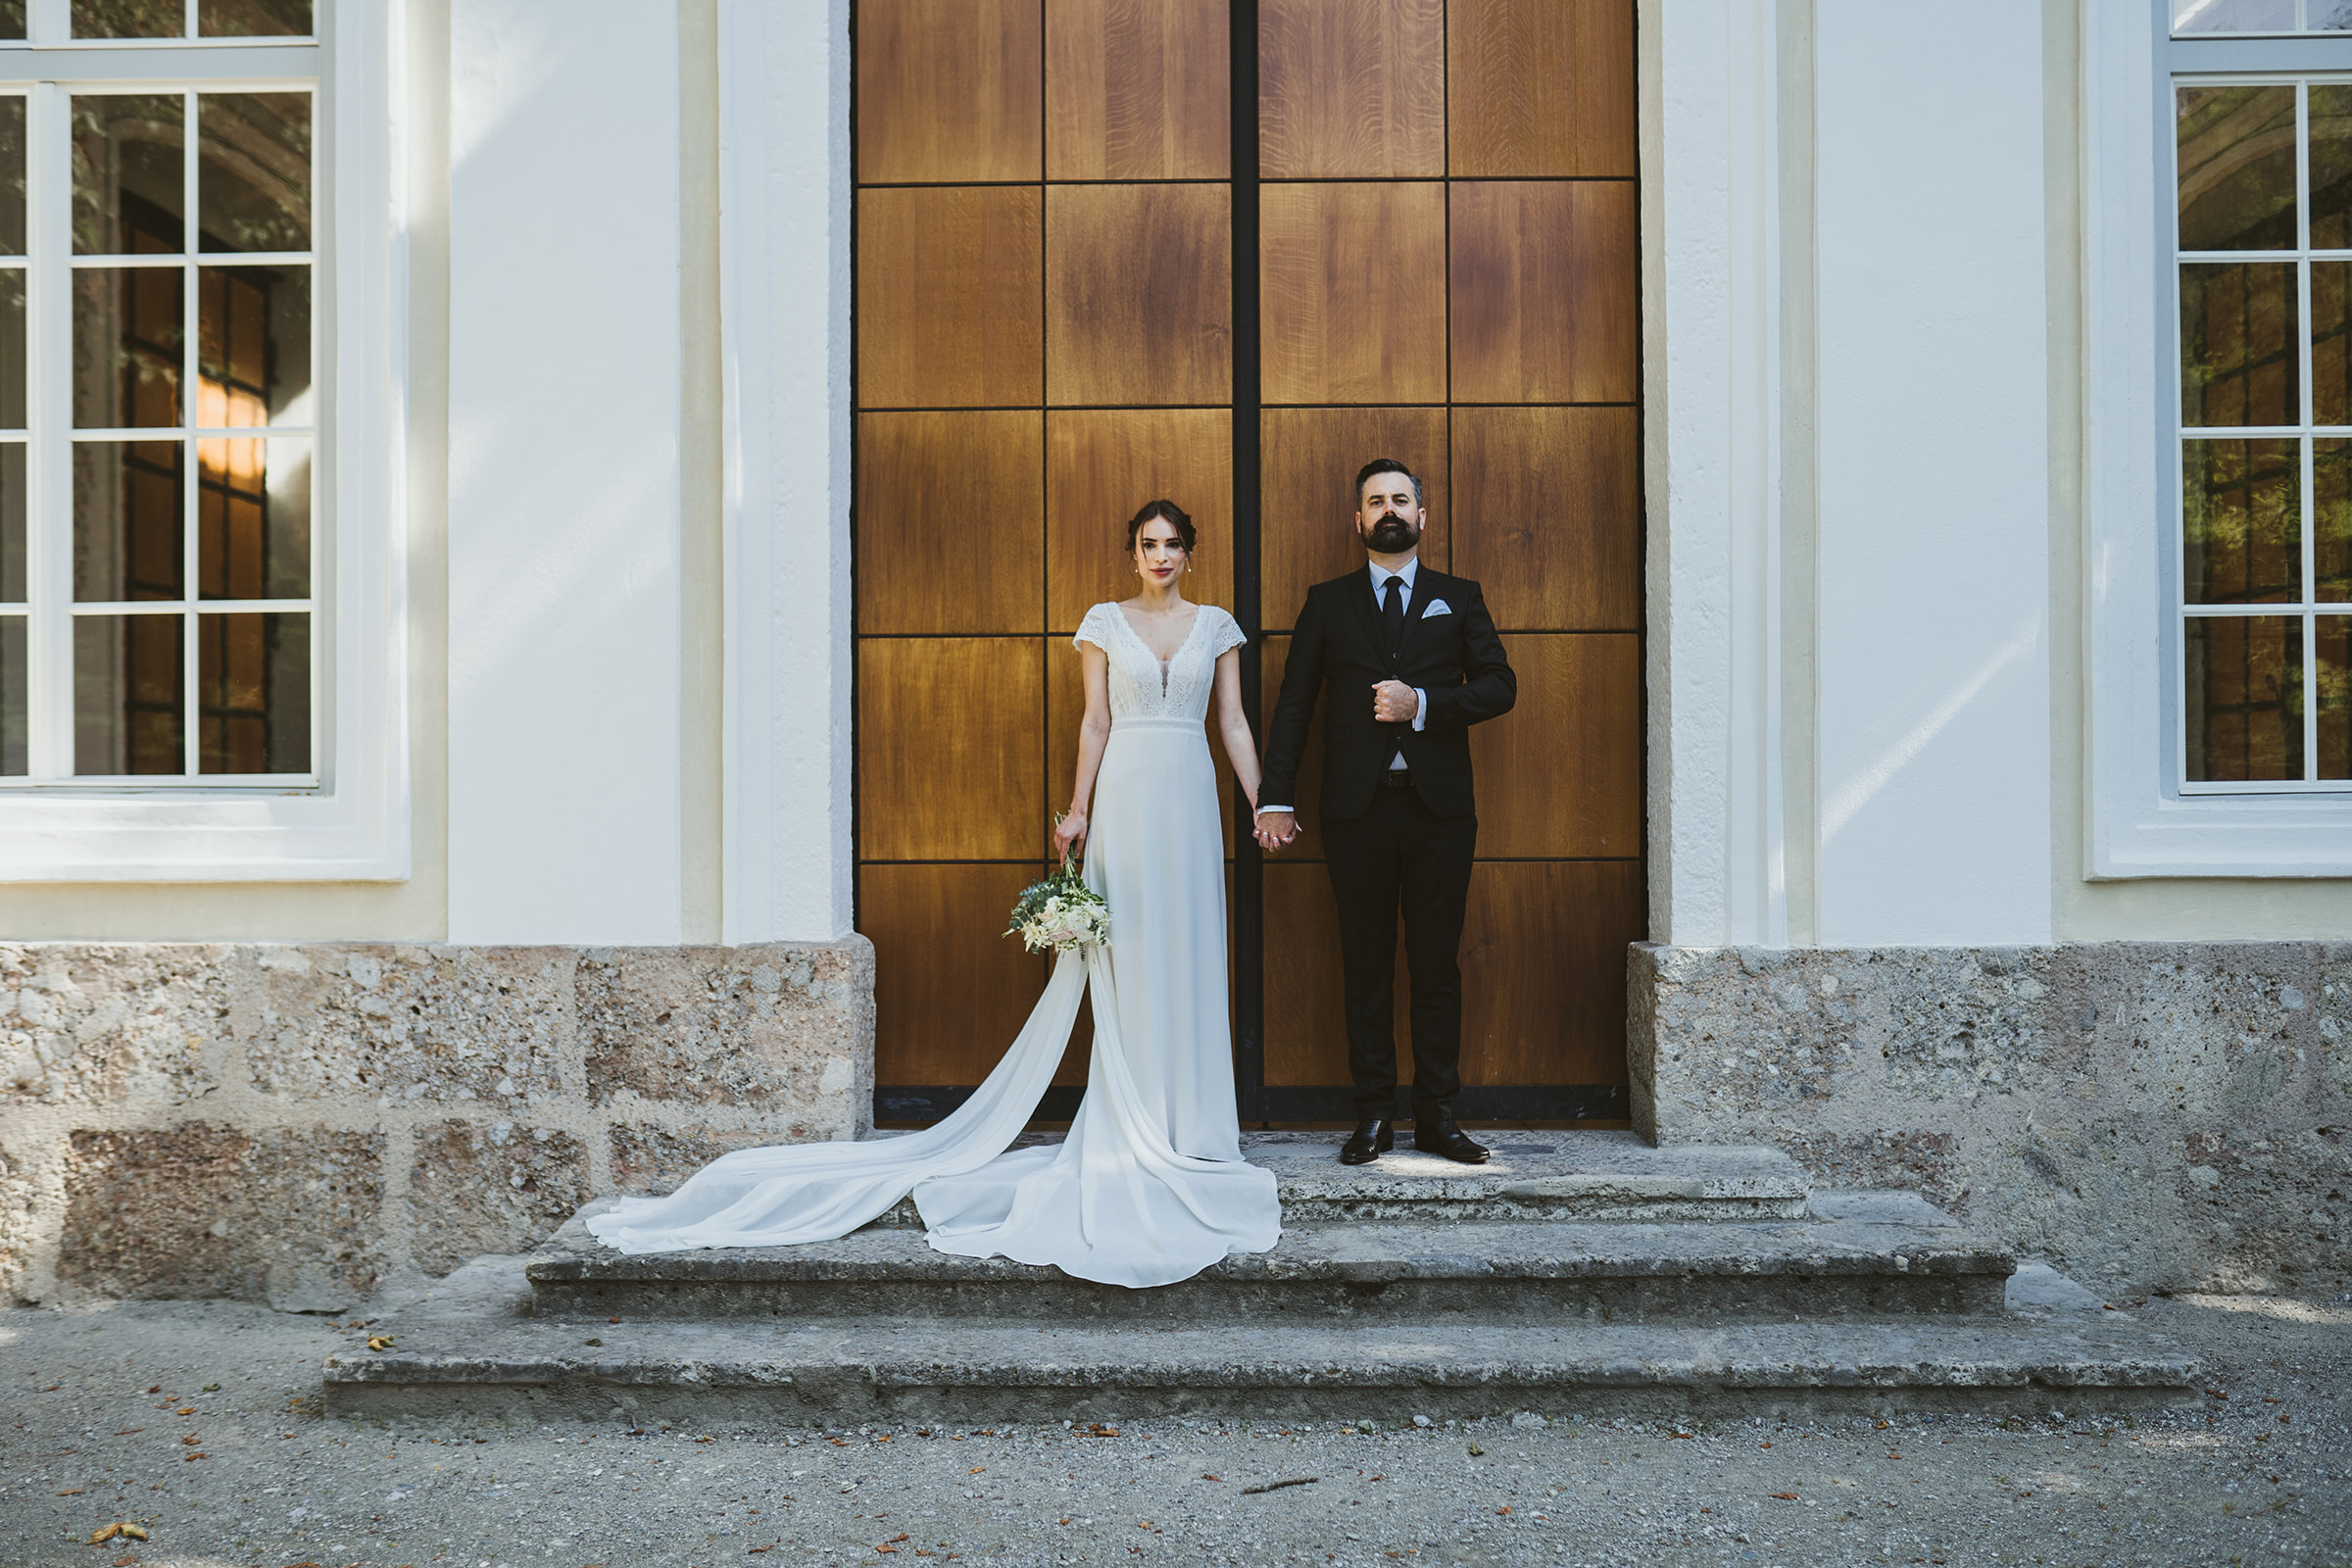 A bride and groom in the hipster pose in front of the music pavilion in the Hofgarten in Innsbruck